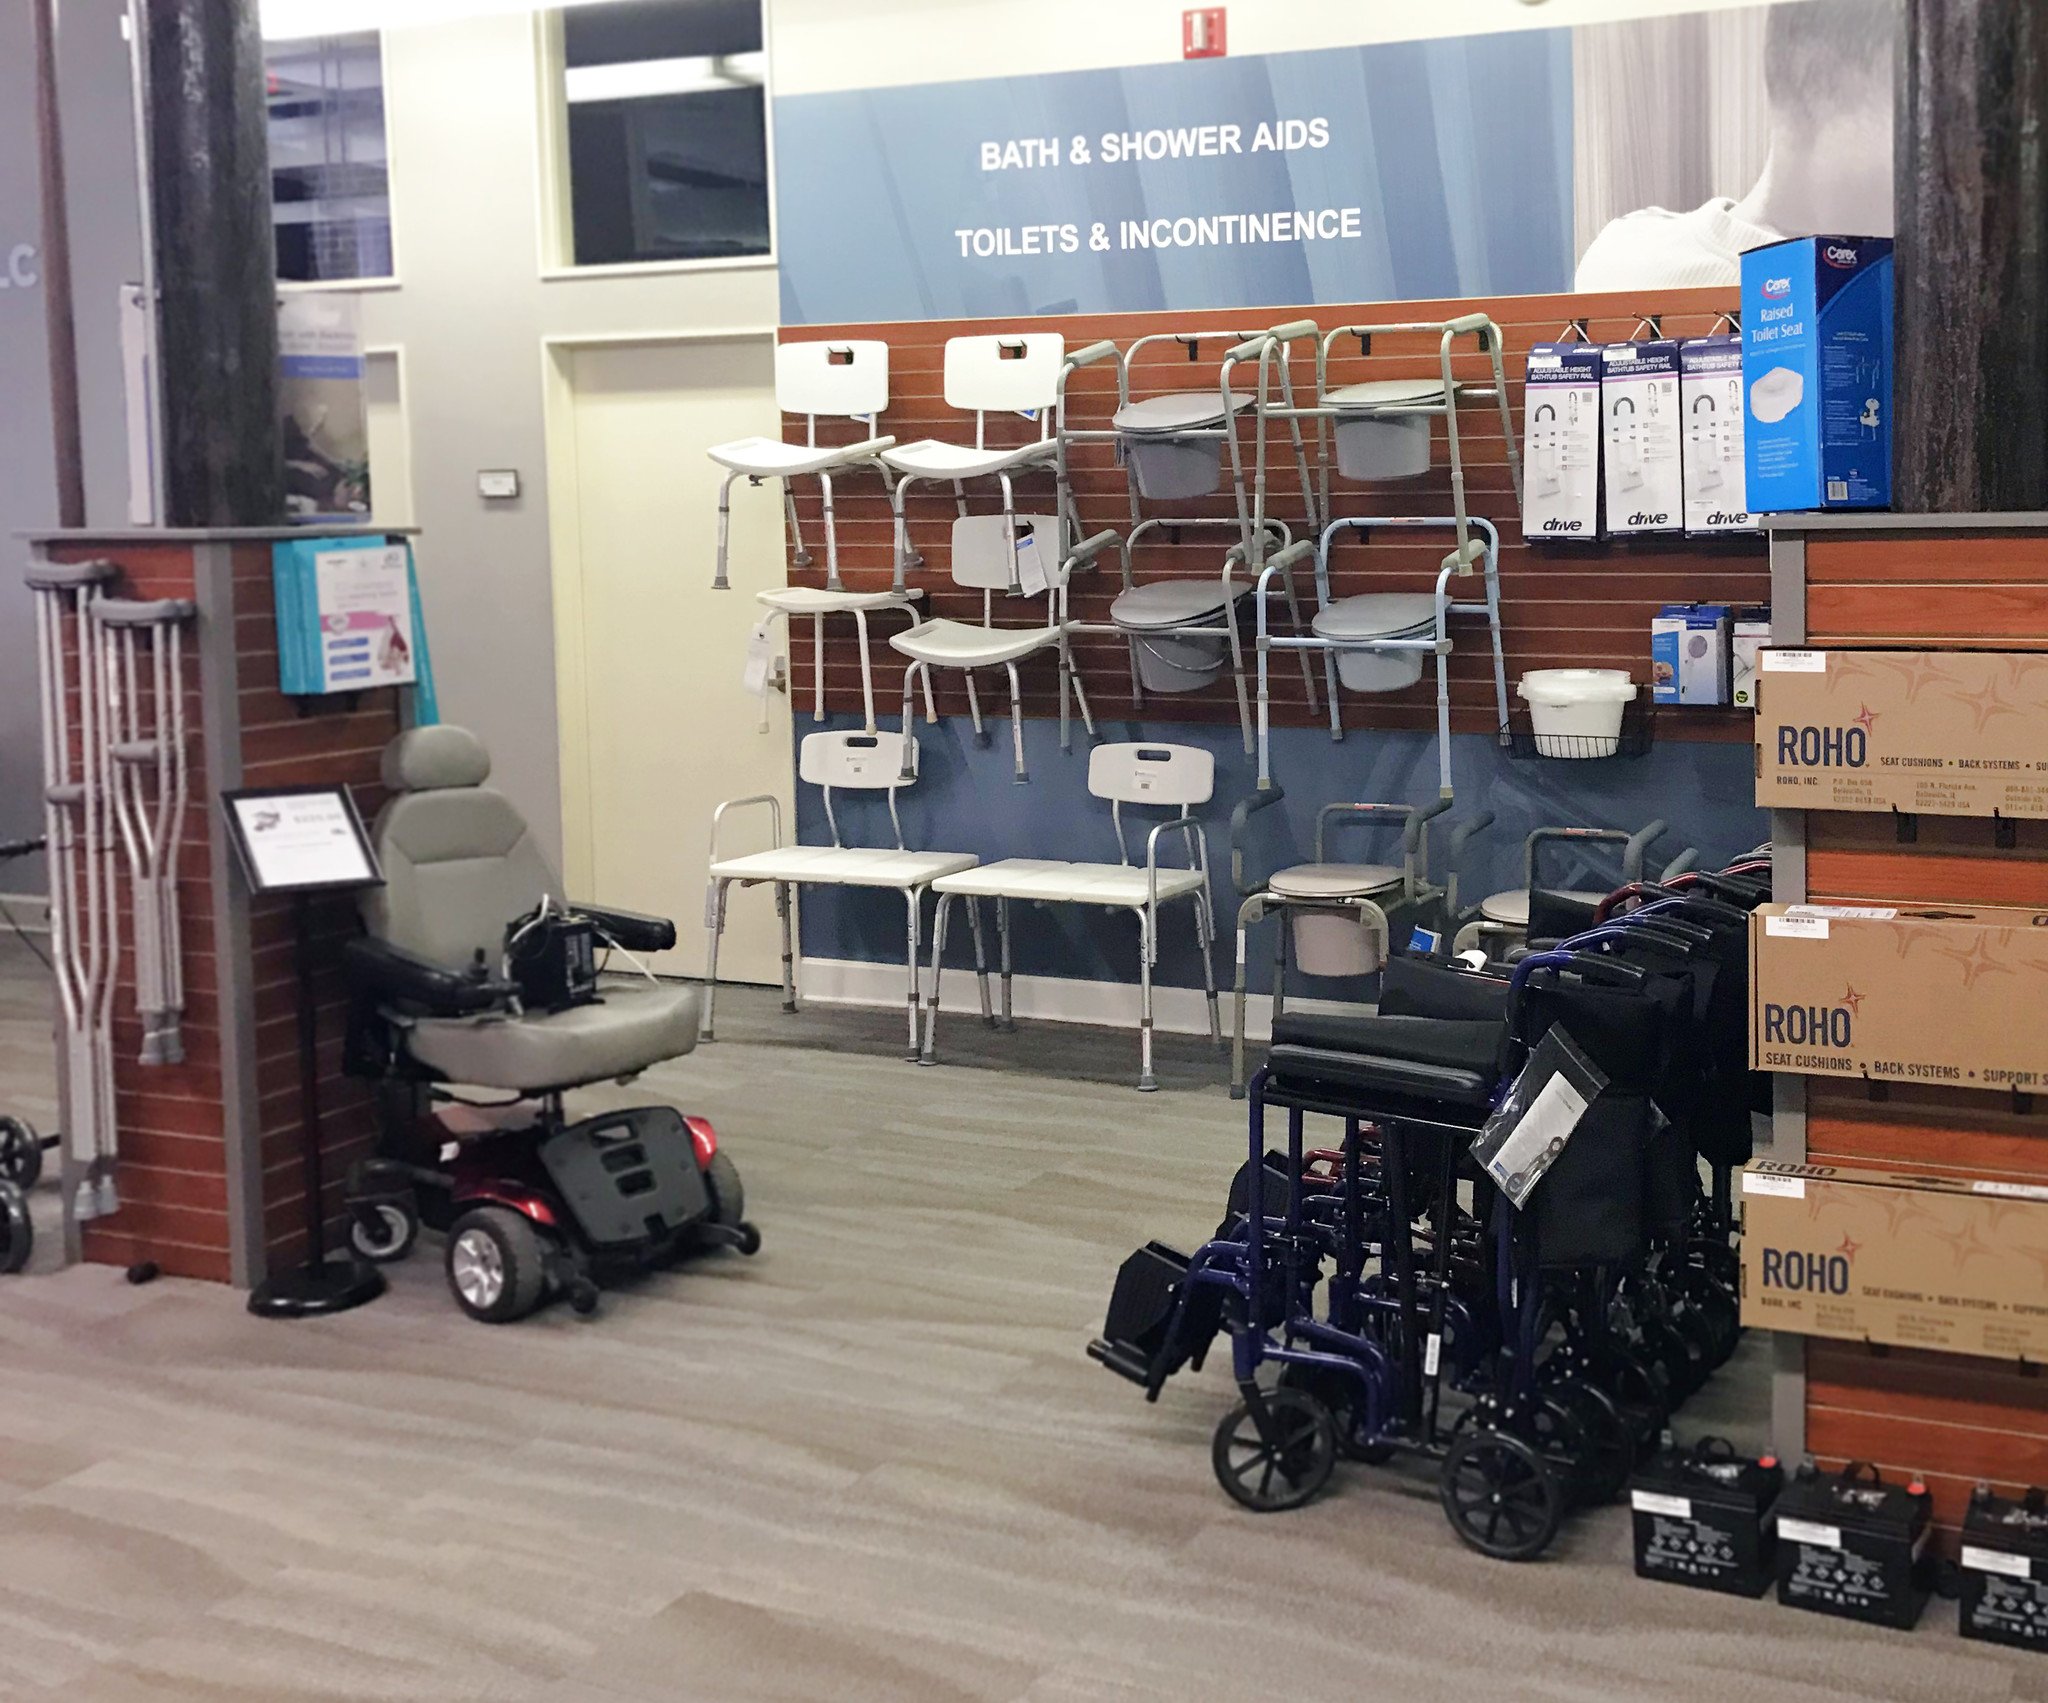 View of Rivermarket Store with Power Wheelchairs, Shower Chairs, Roho Cushions, and more.